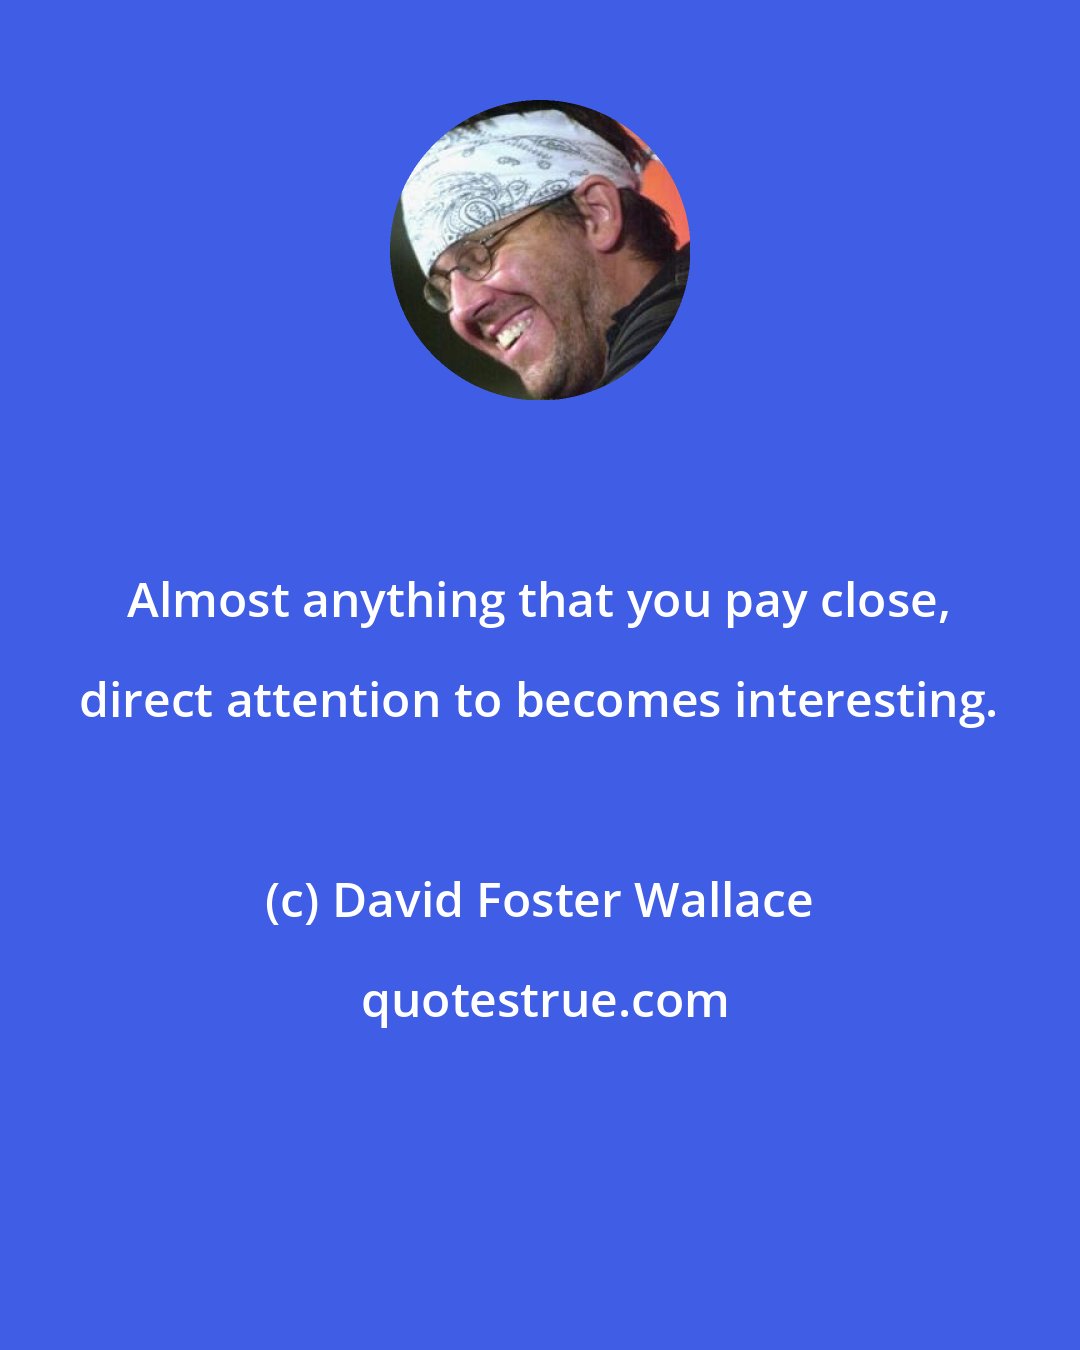 David Foster Wallace: Almost anything that you pay close, direct attention to becomes interesting.